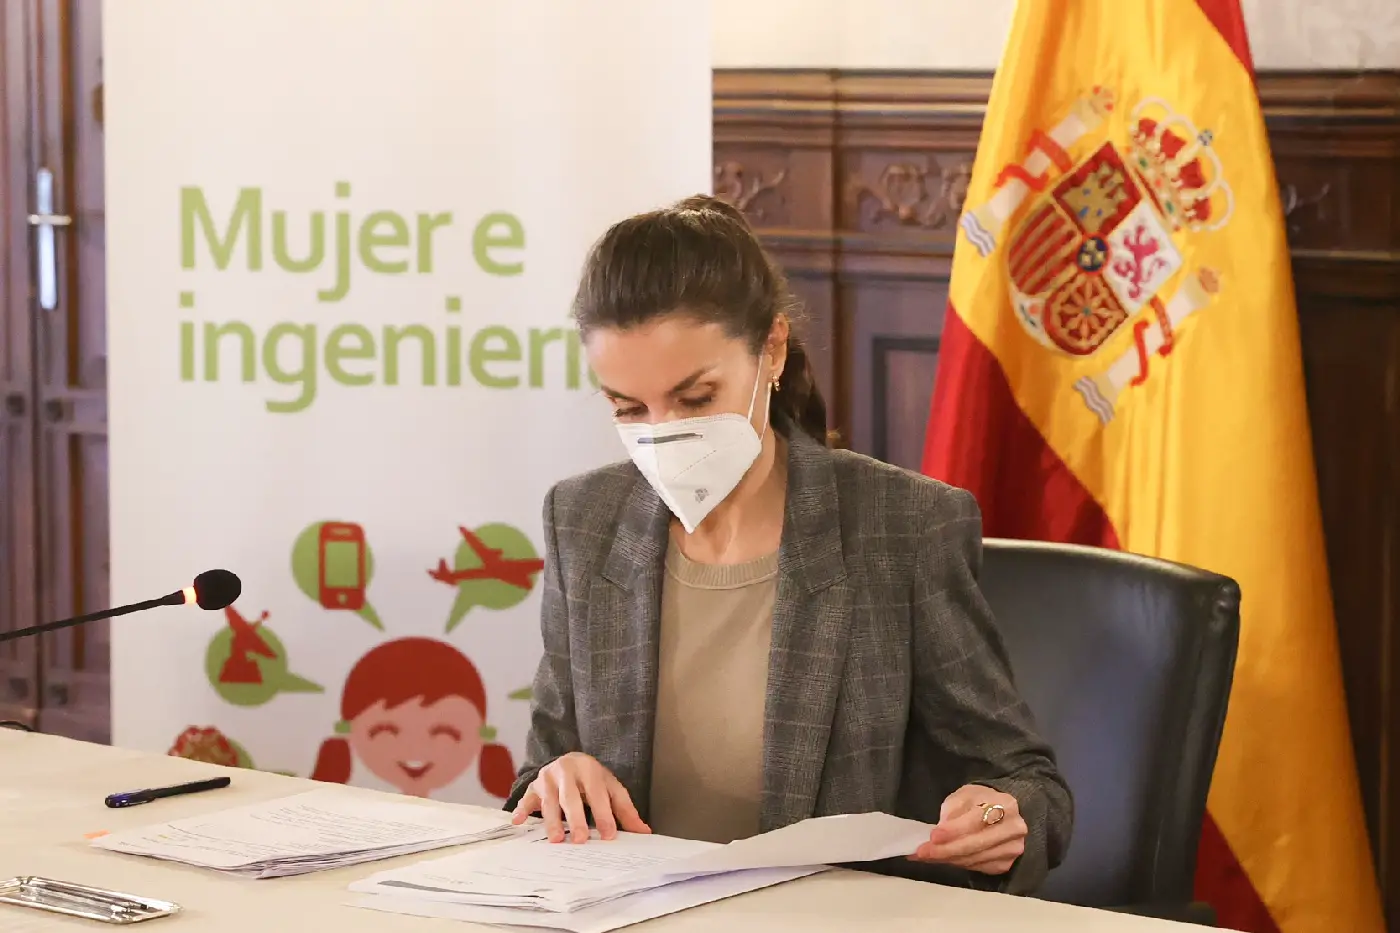 Queen Letizia of Spain at the Women and Engineering Project meeting in Madrid